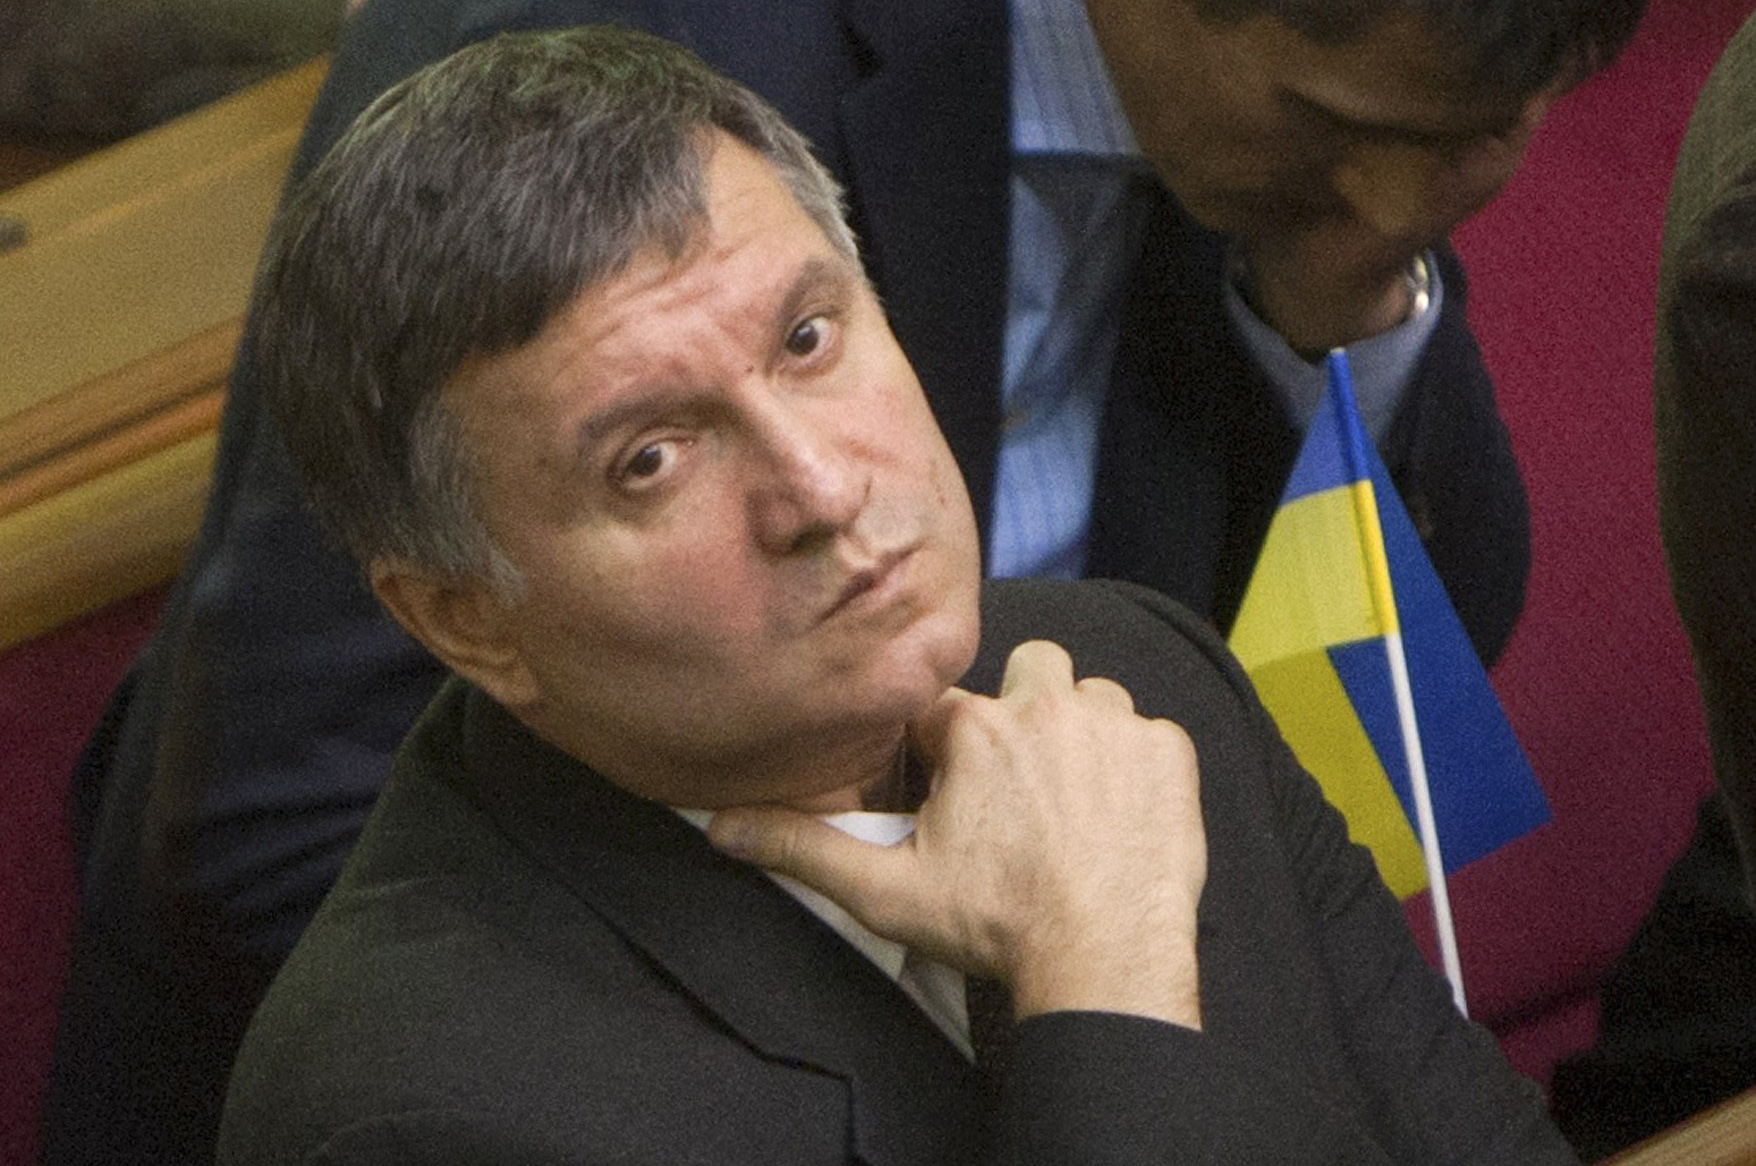 Newly elected interior minister Arsen Avakov attends a session of the Ukrainian parliament in Kiev